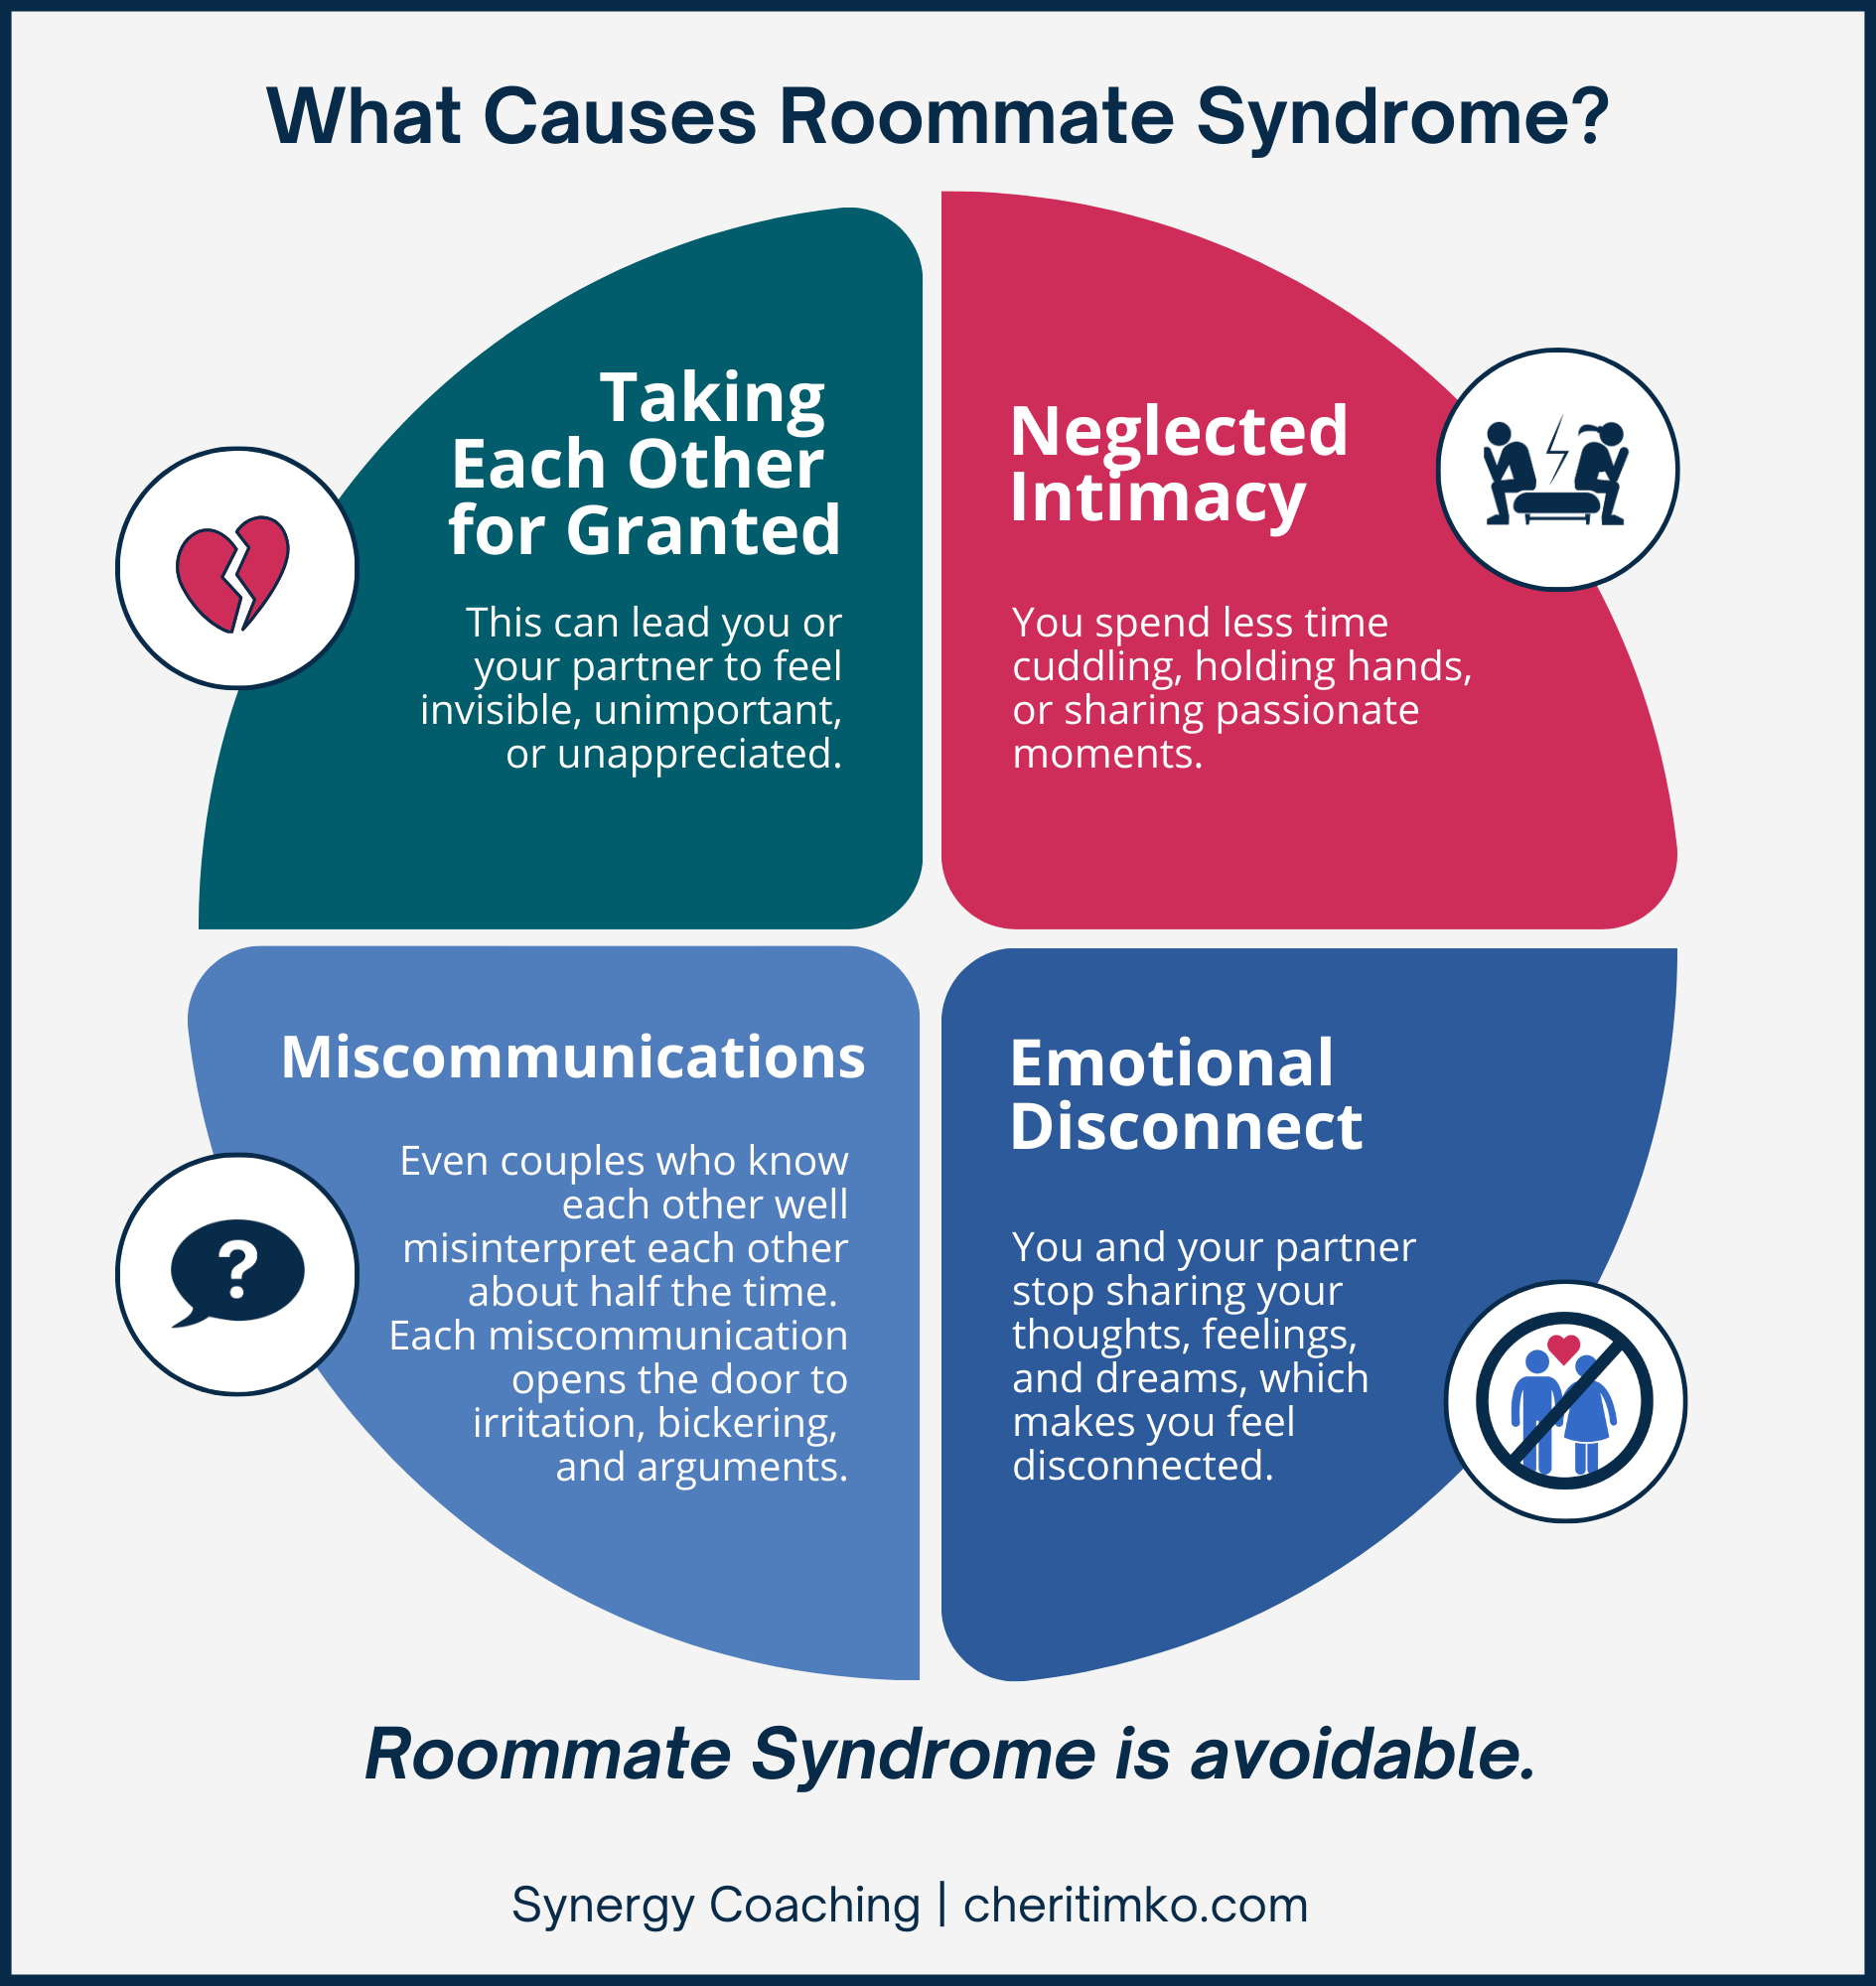 What Causes Roommate Syndrome?